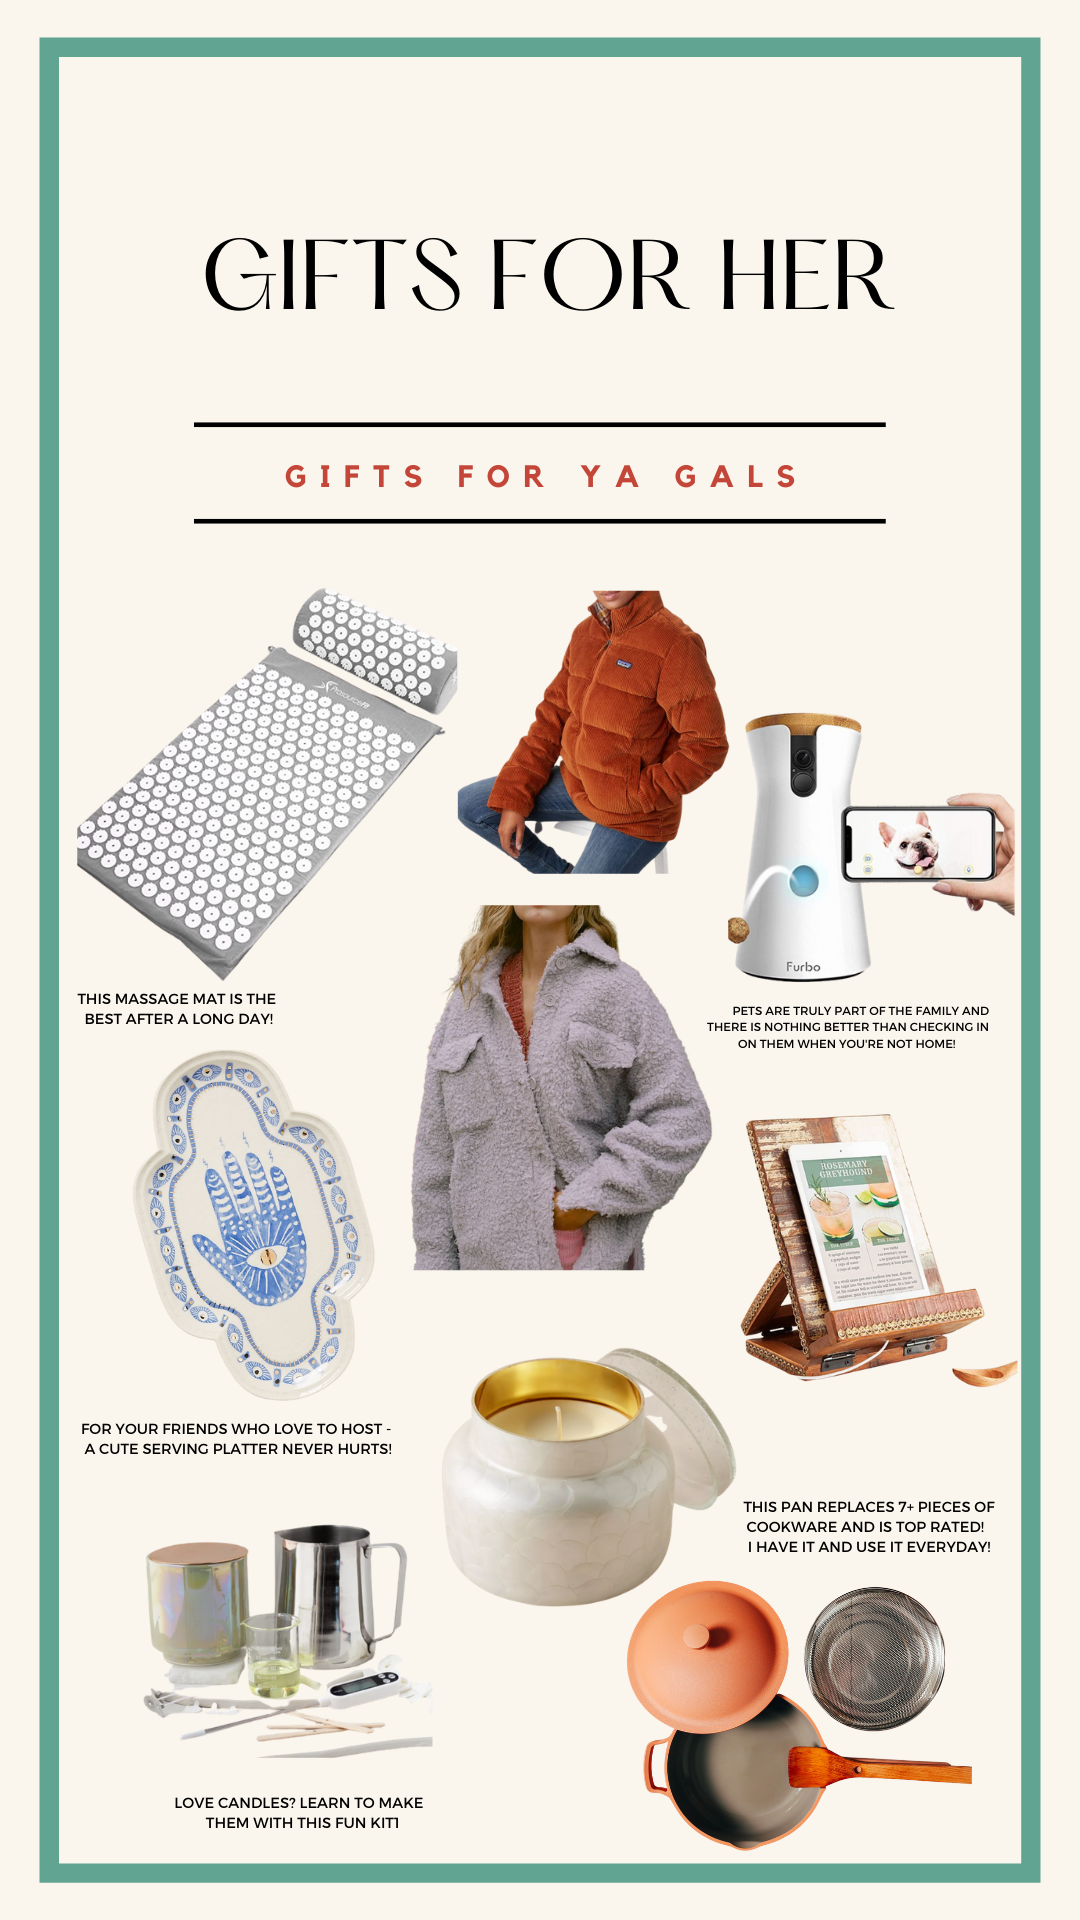 20+ Best Gifts for Him (Christmas Gift Guide for dad, boyfriend, brother,  etc)